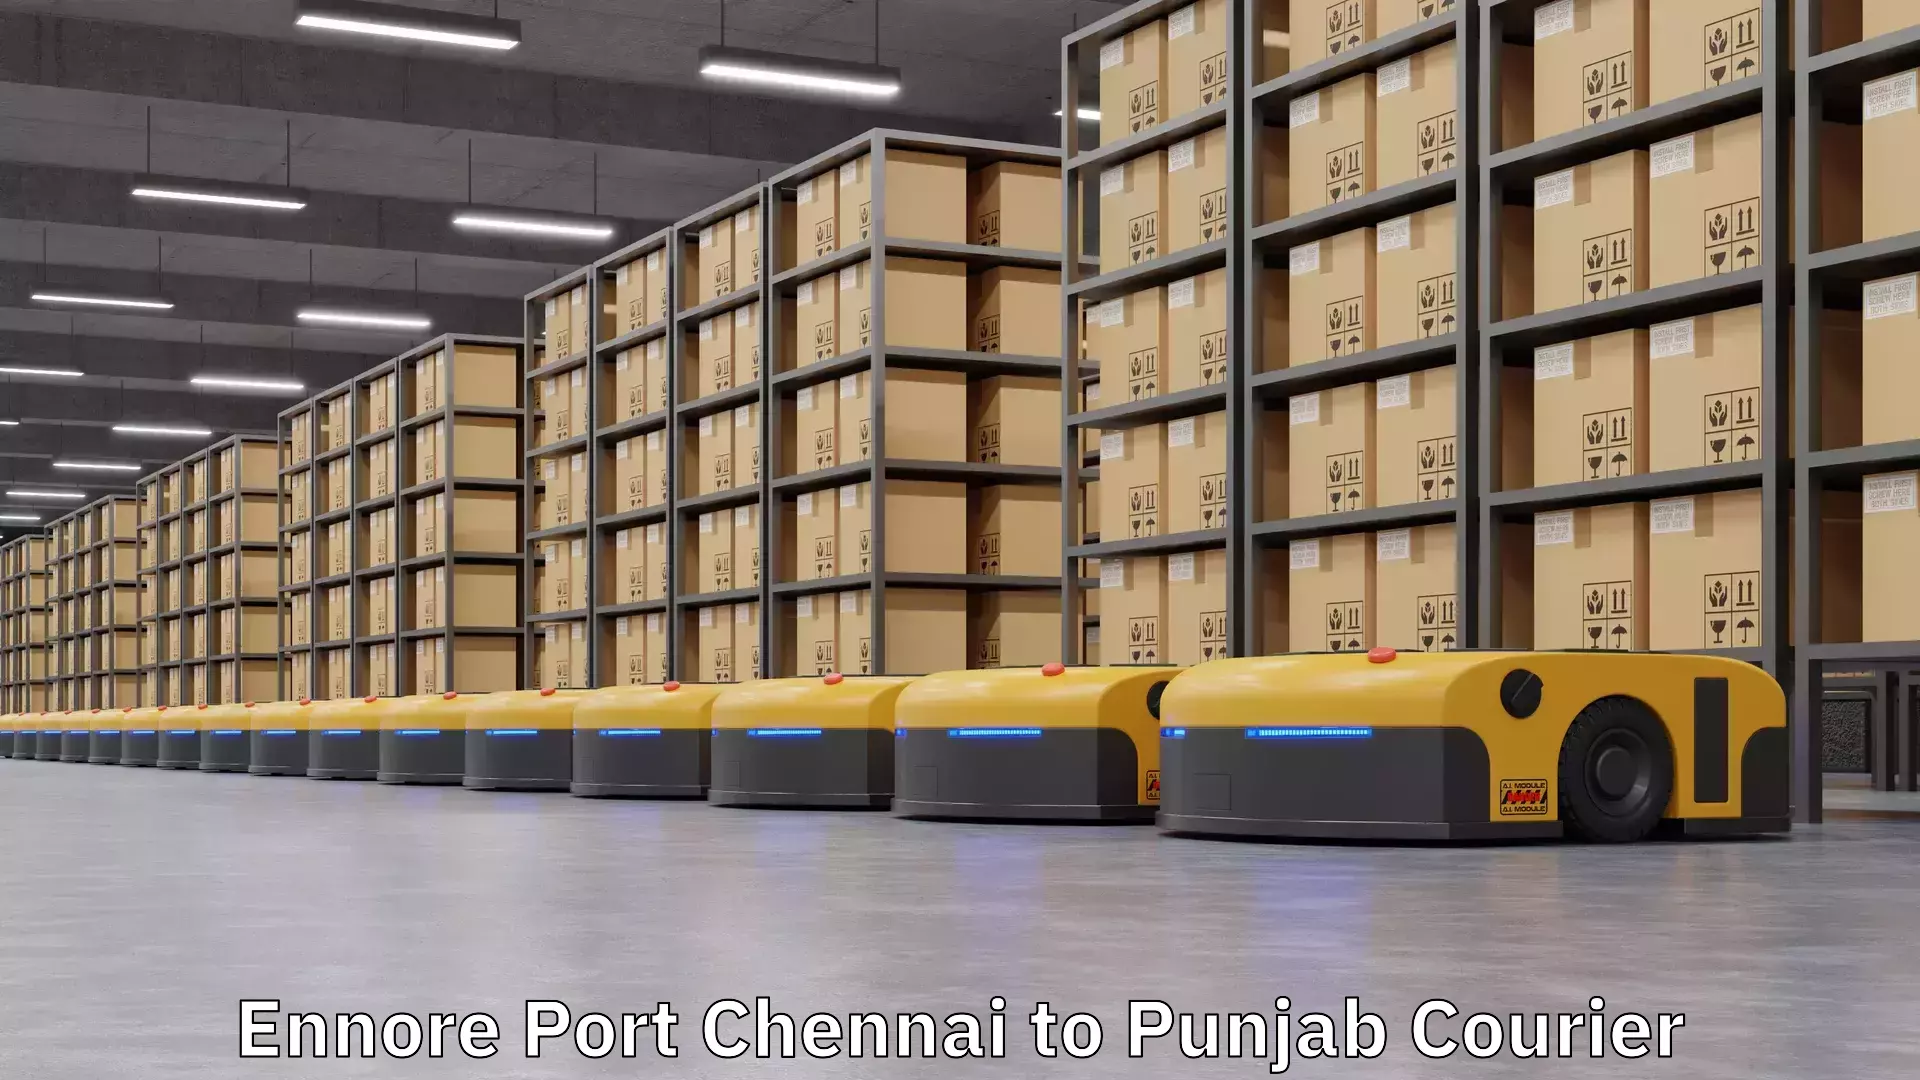 Supply chain delivery Ennore Port Chennai to Punjab